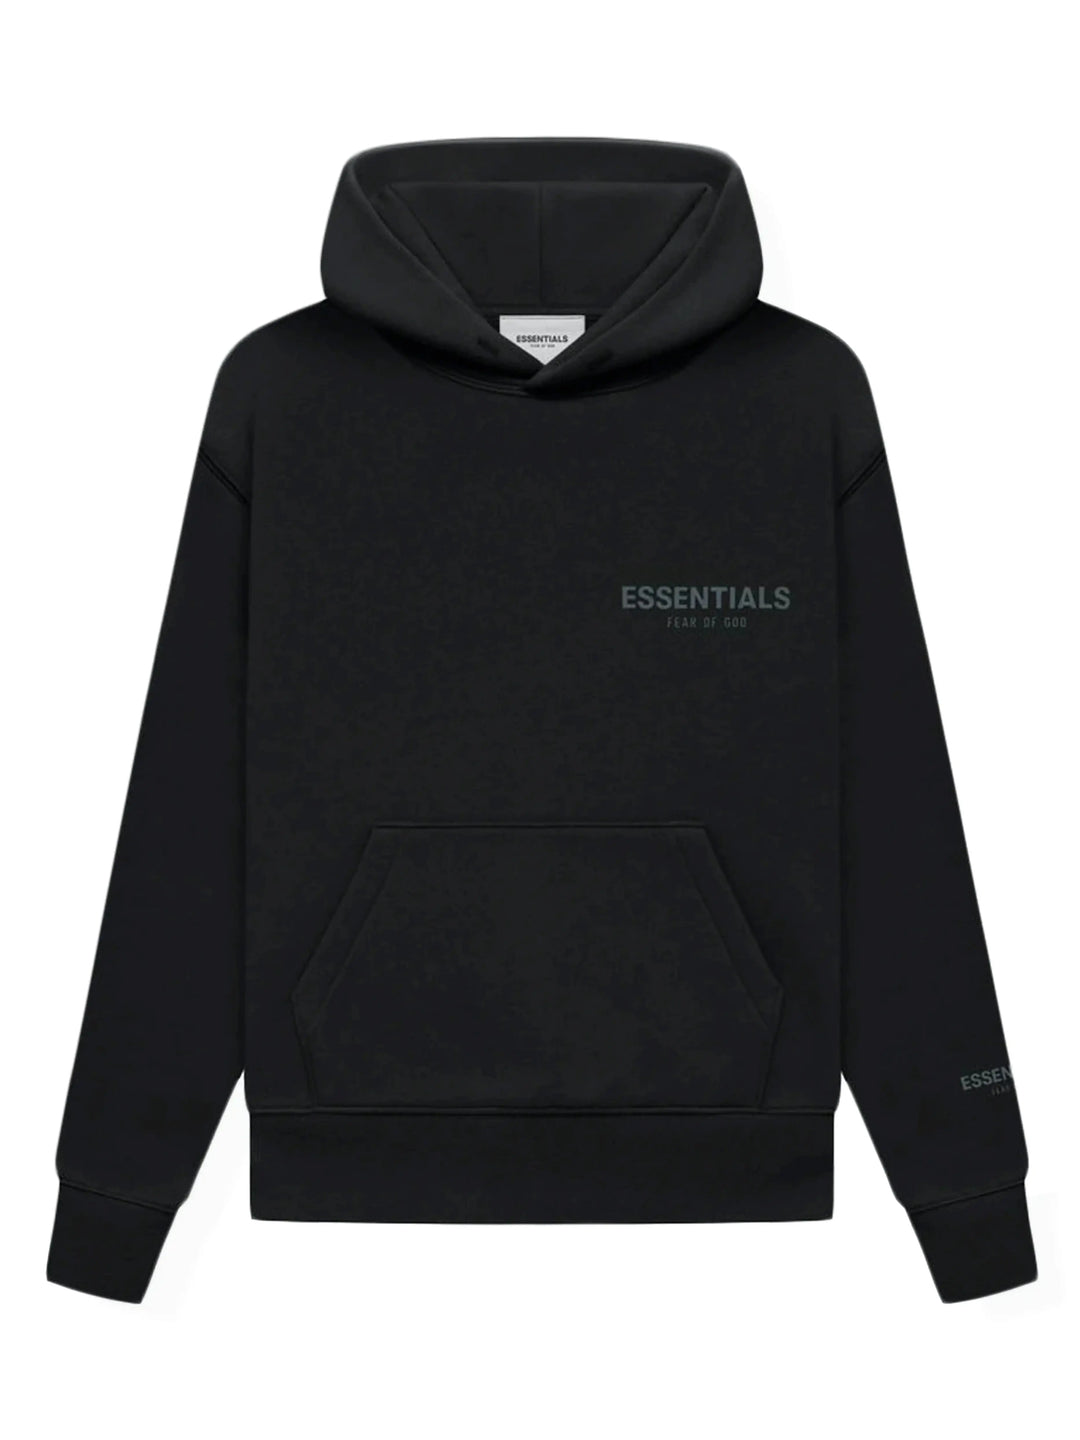 Fear of God Essentials Core Collection Hoodie Black [FW21] Prior